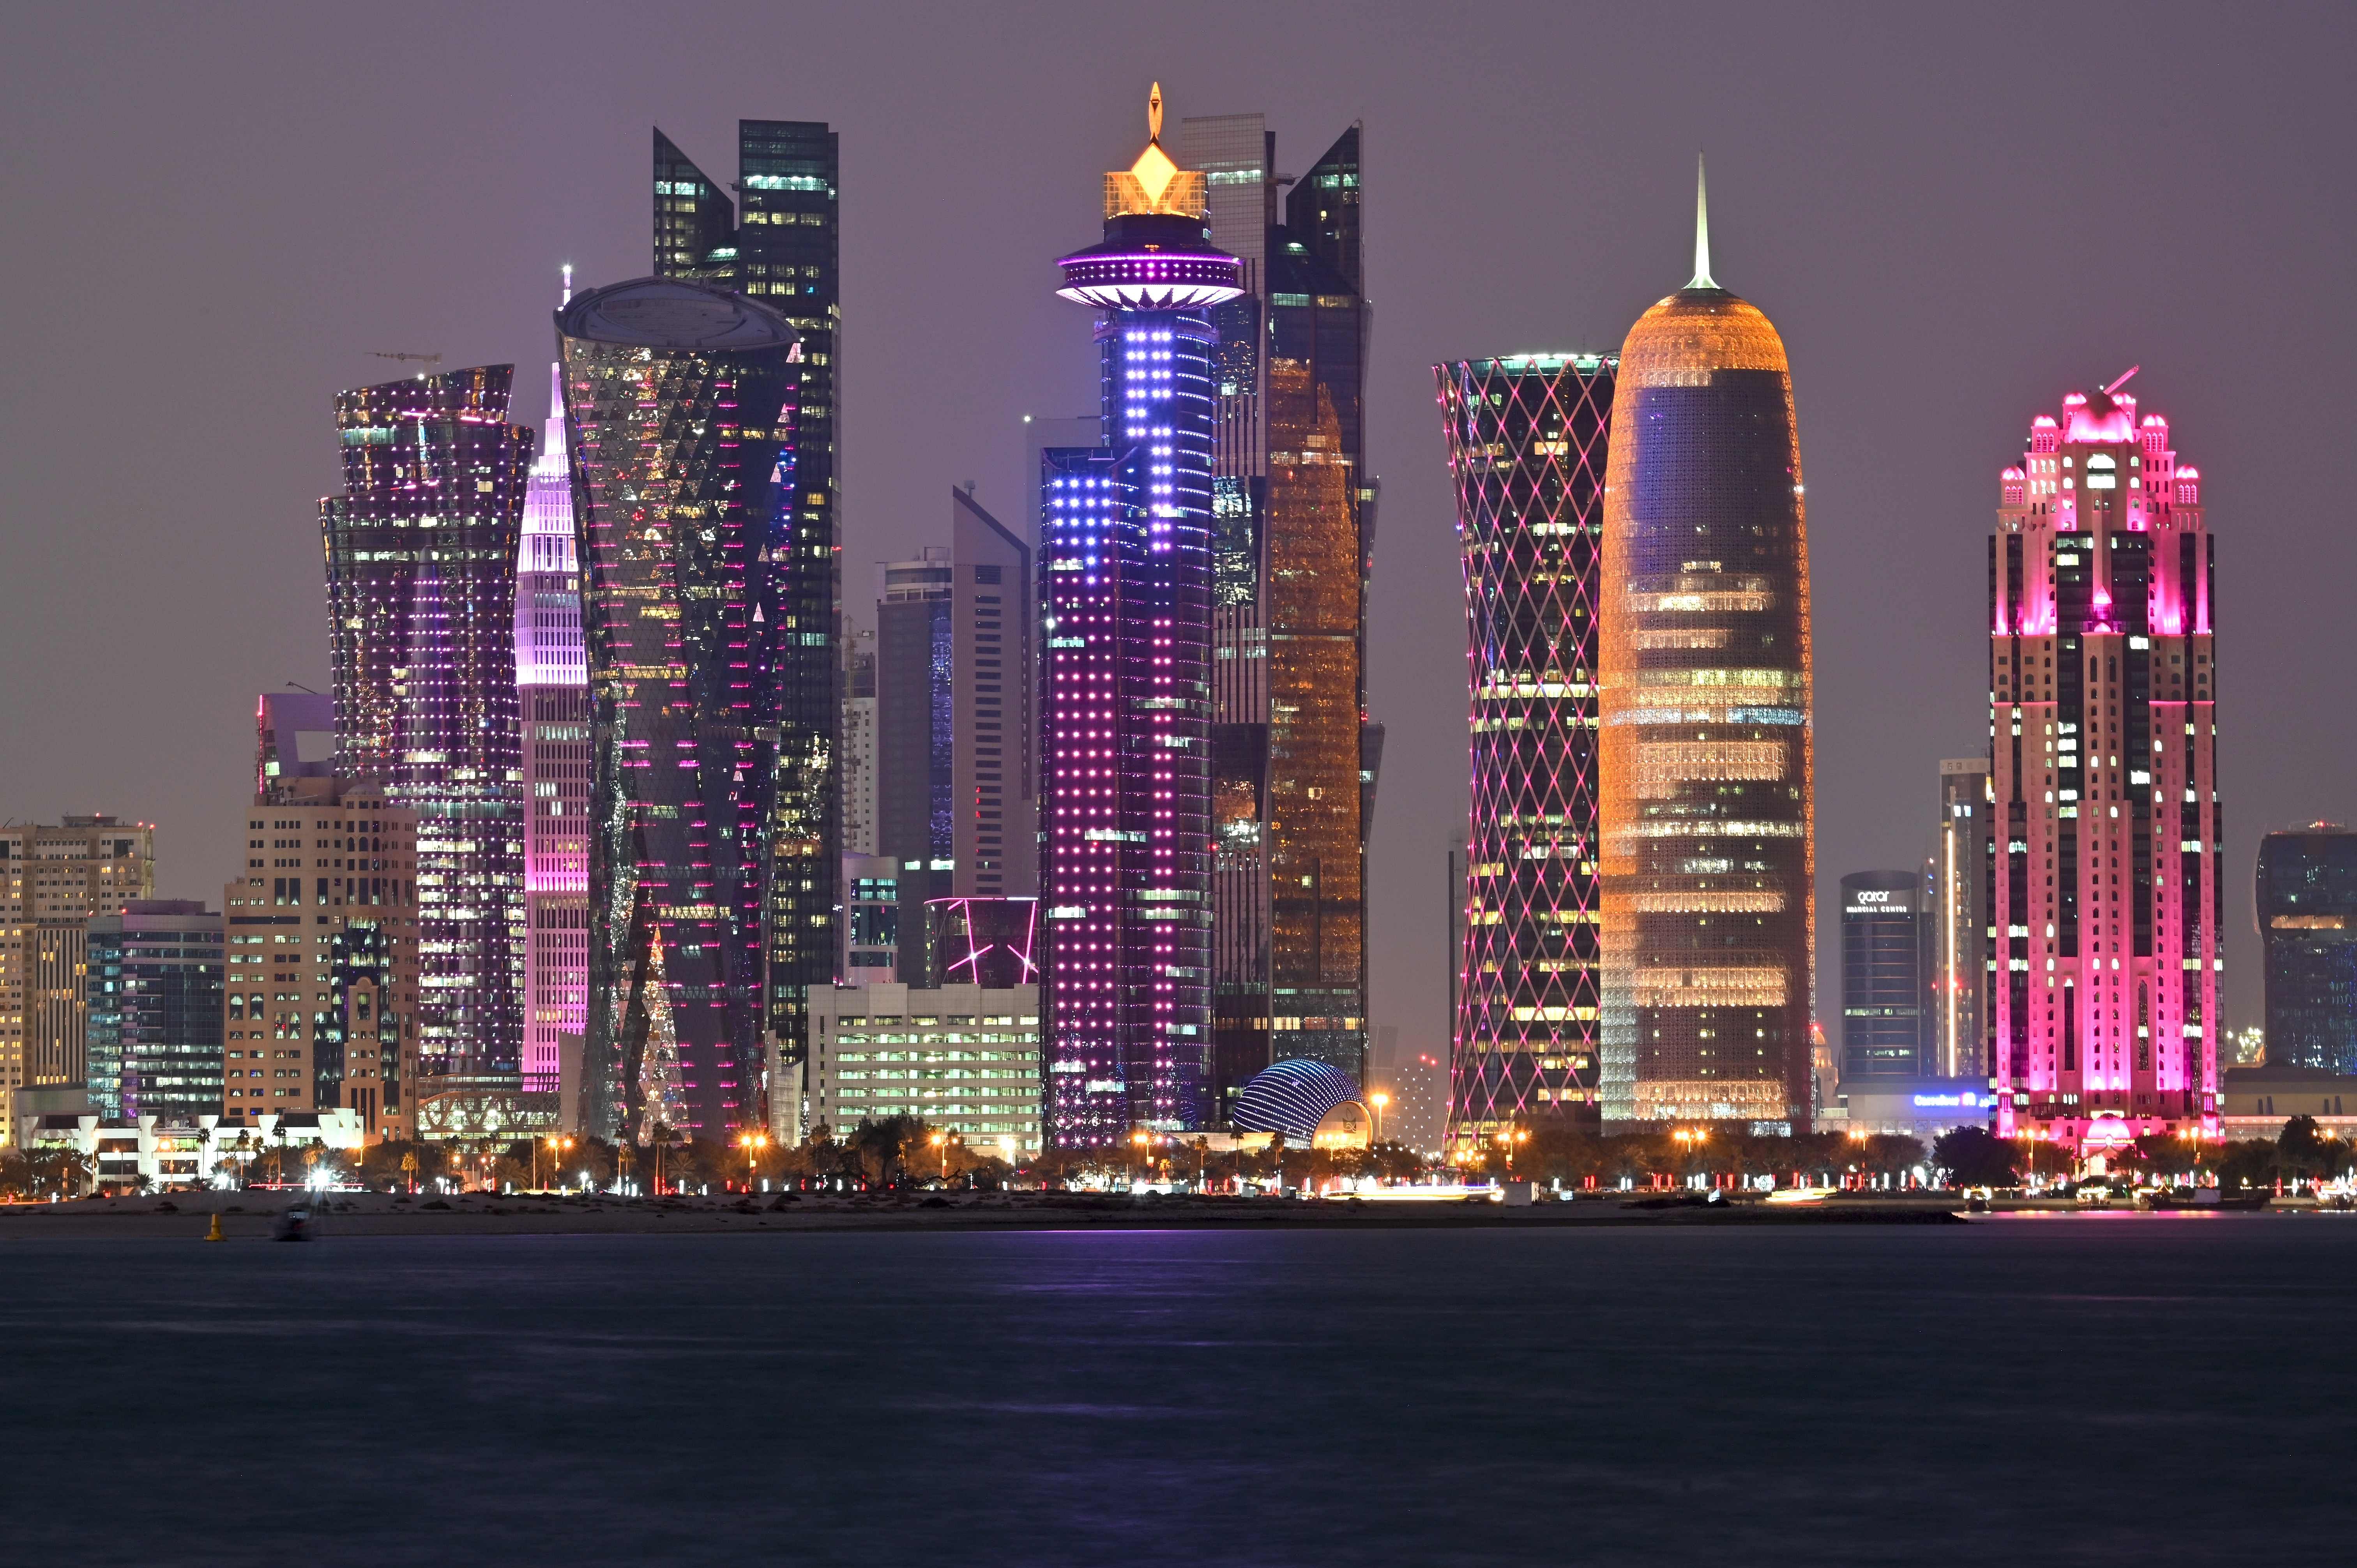 Qatar has marketed its opulent skyscraper hotels as a jewel in its World Cup crown. Credit: AFP Photo